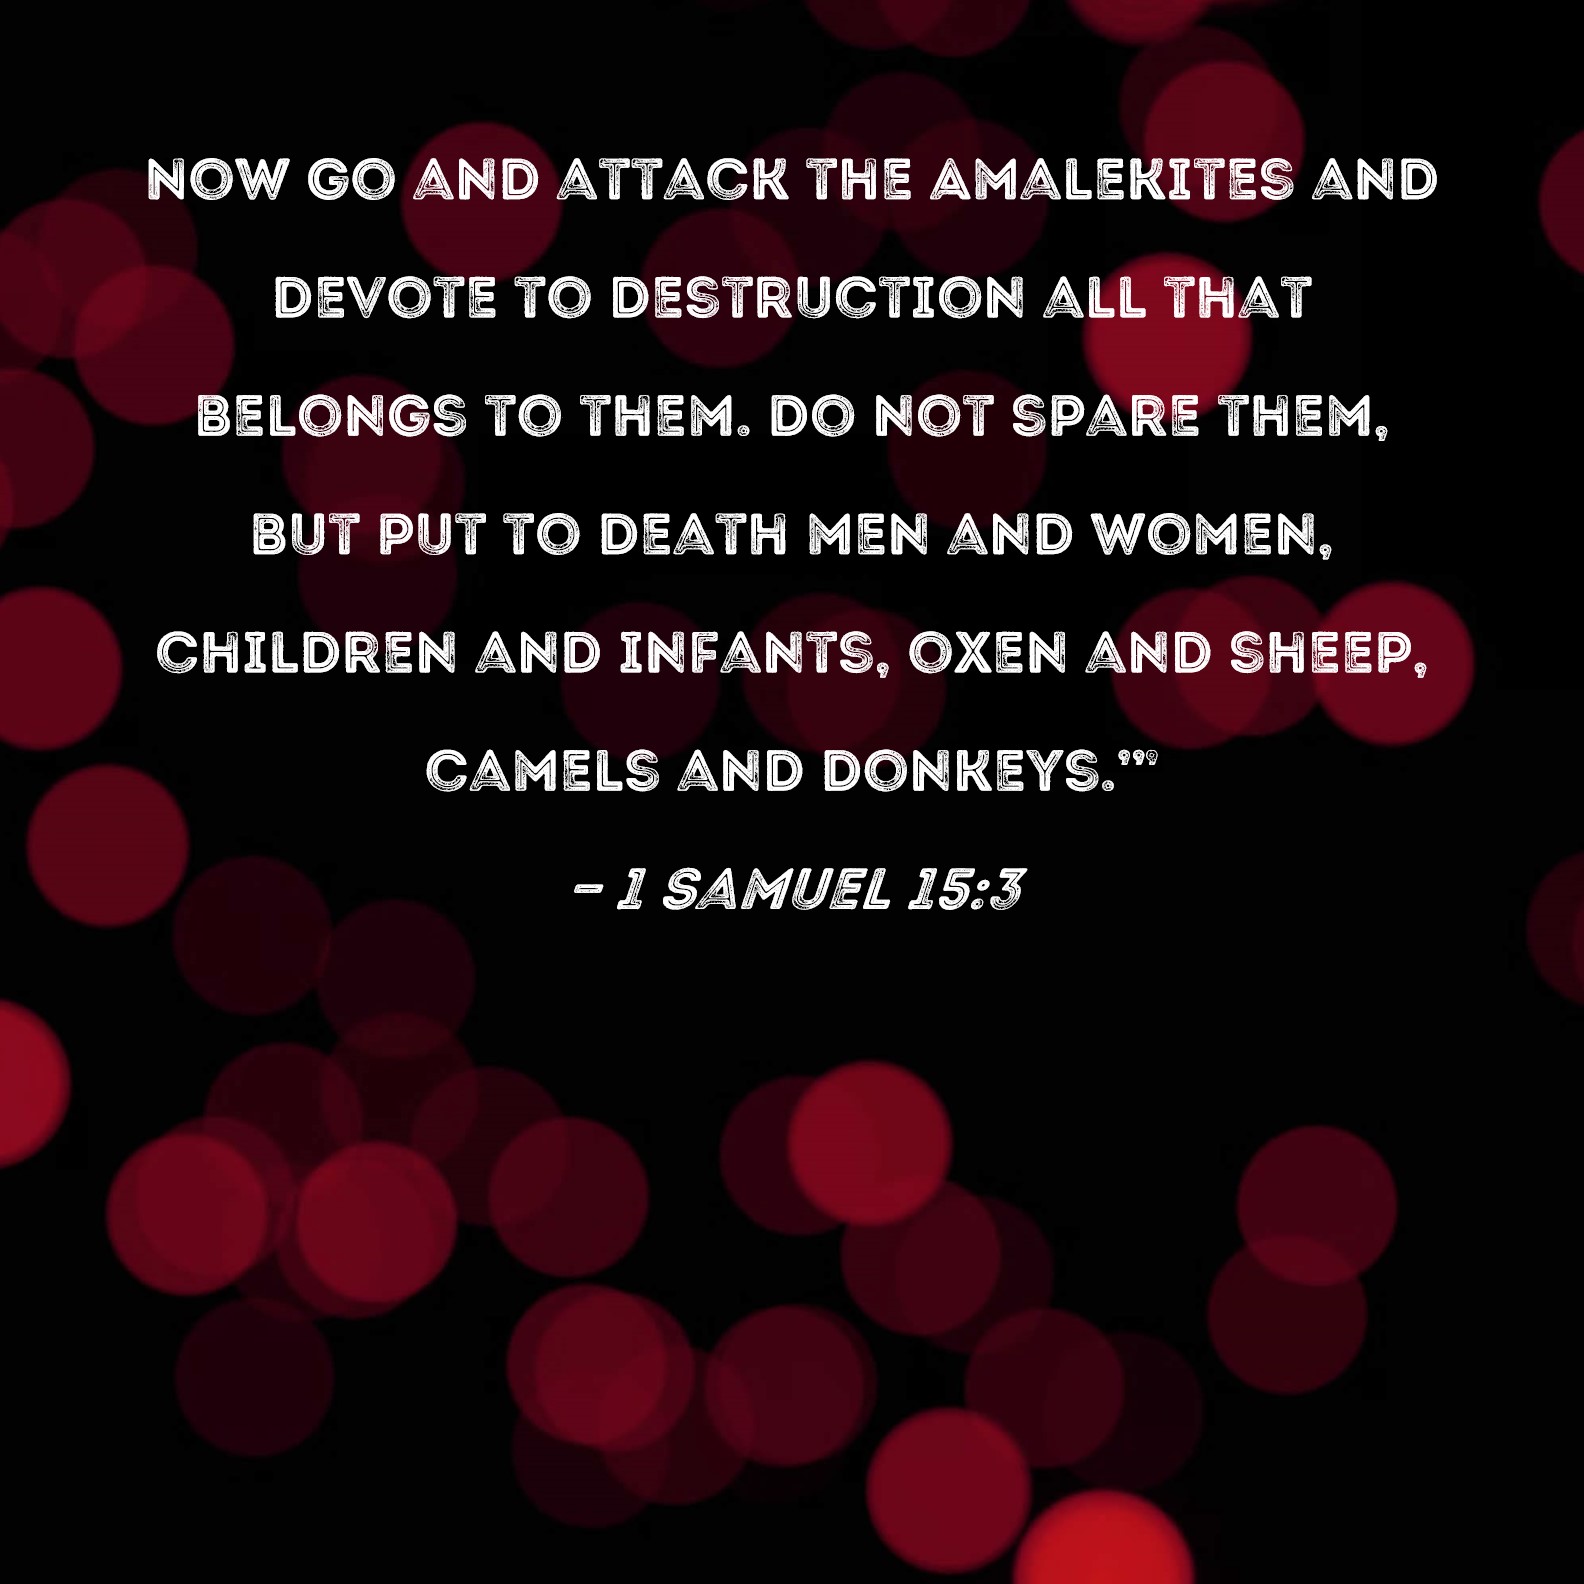 1 Samuel 153 Now go and attack the Amalekites and devote to destruction  all that belongs to them Do not spare them but put to death men and women  children and infants